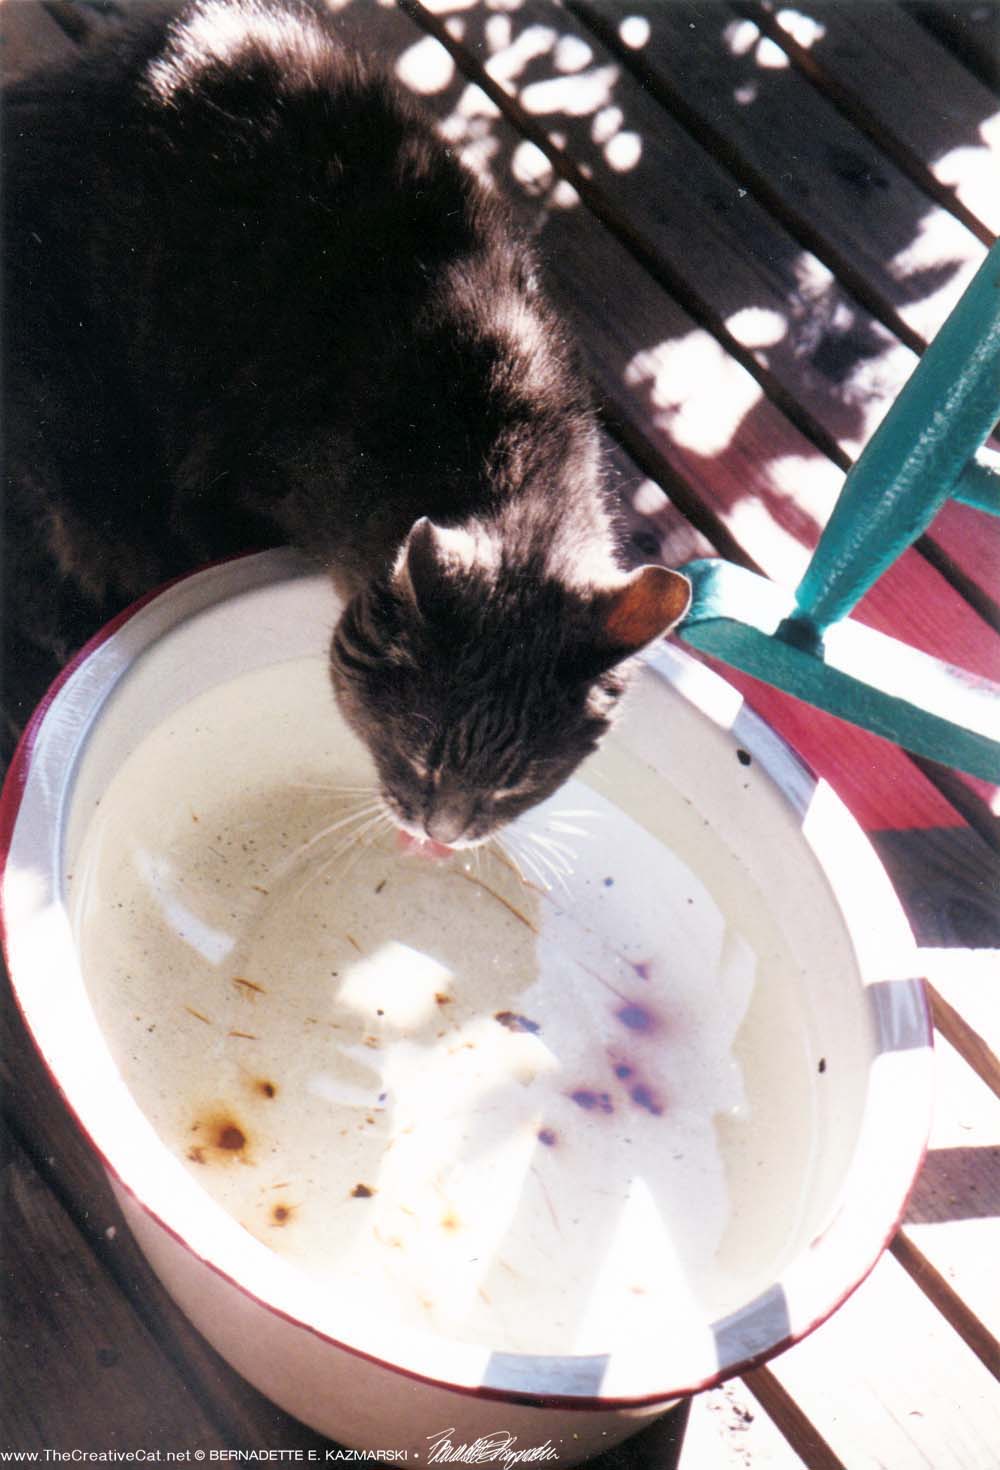 Moses drinks from the water bowl on the deck.